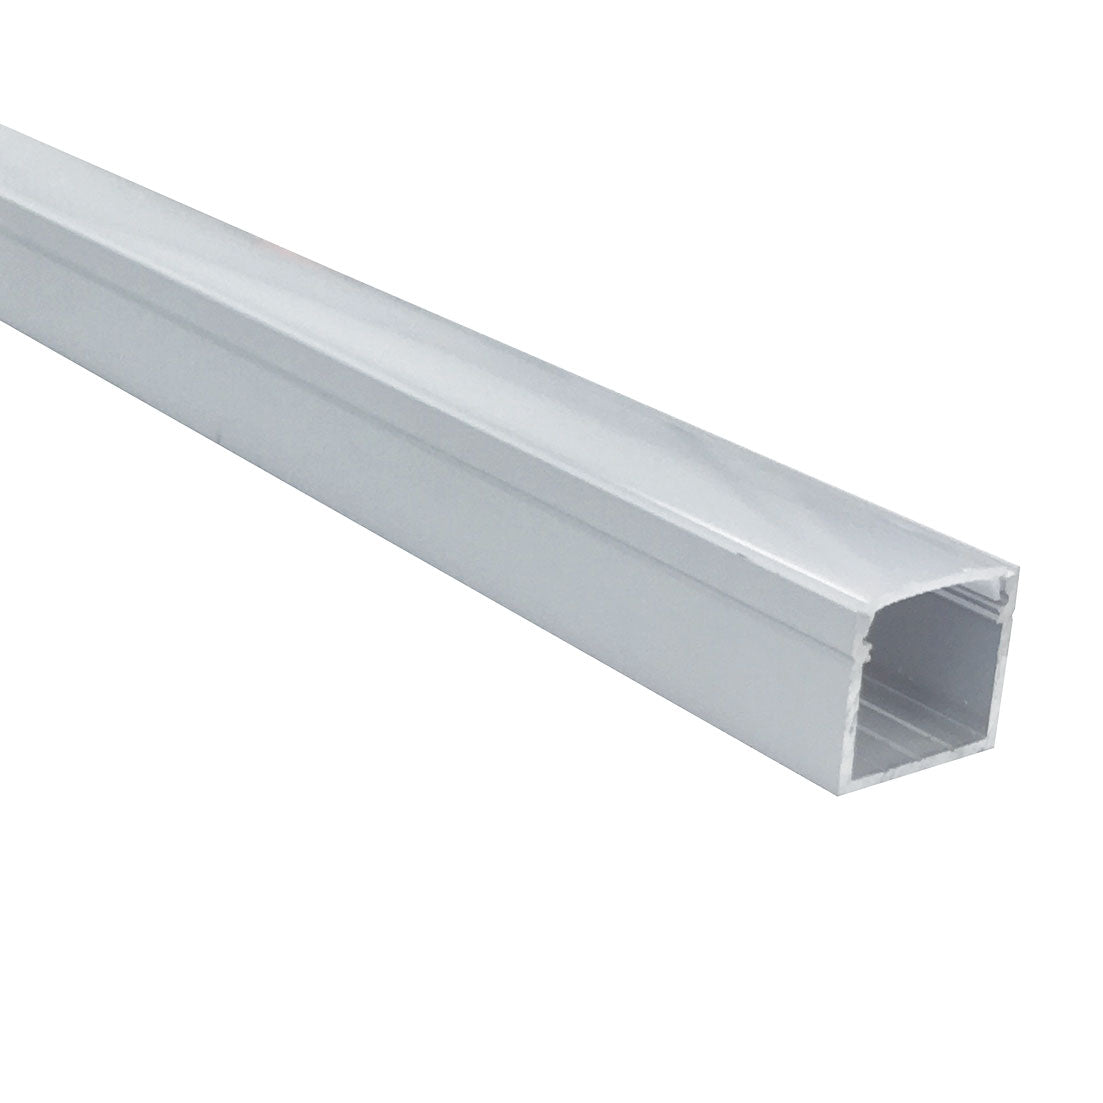 Nora Lighting NATL-C26A - Accent / Undercabinet - 4-ft Deep Channel, Aluminum (Plastic Diffuser and End Caps Included)